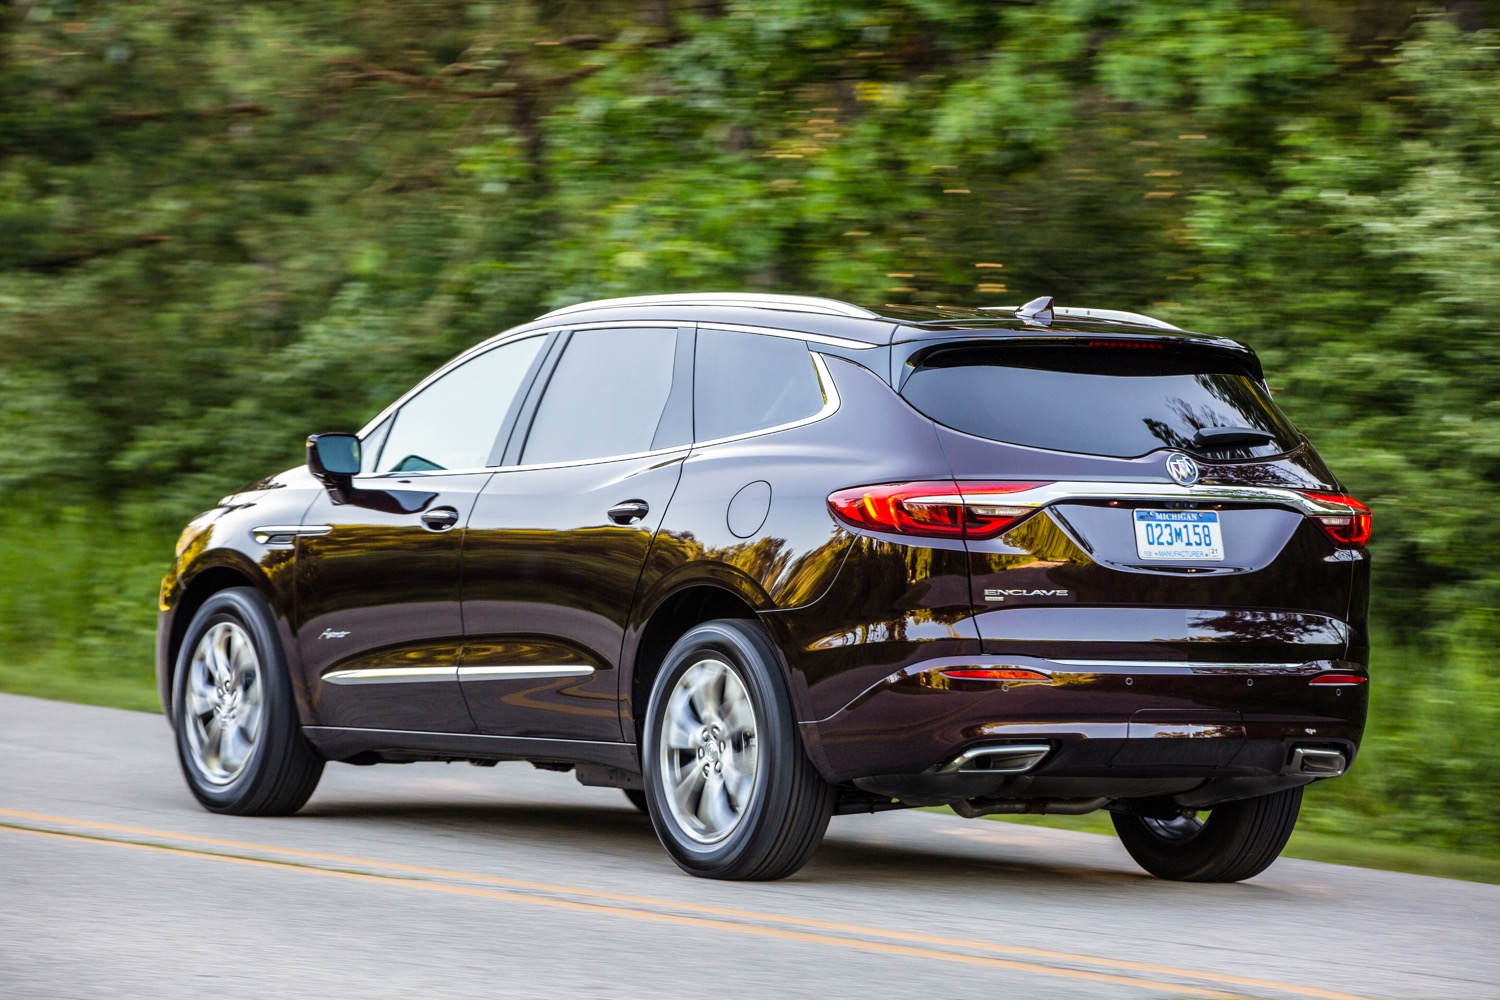 2020 Buick Enclave Avenir Styling Updates On Display | GM ...